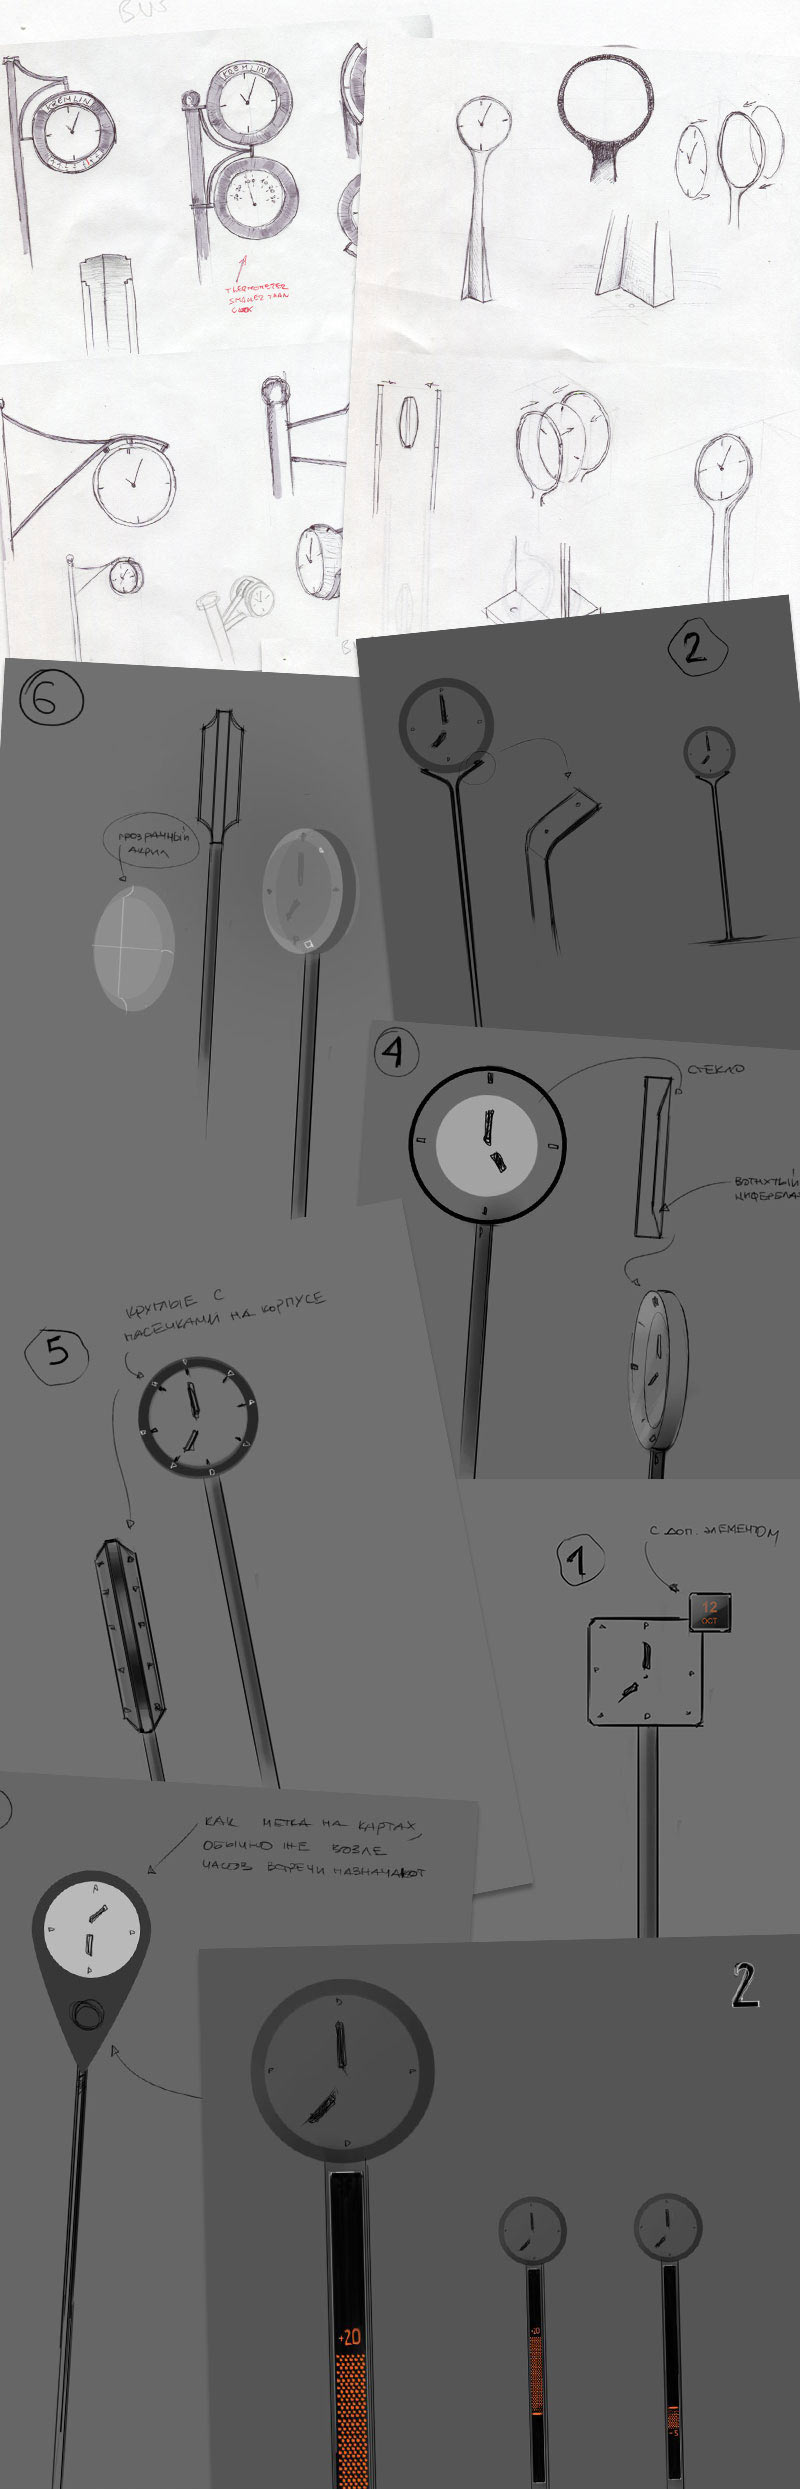 moscow clock process 06